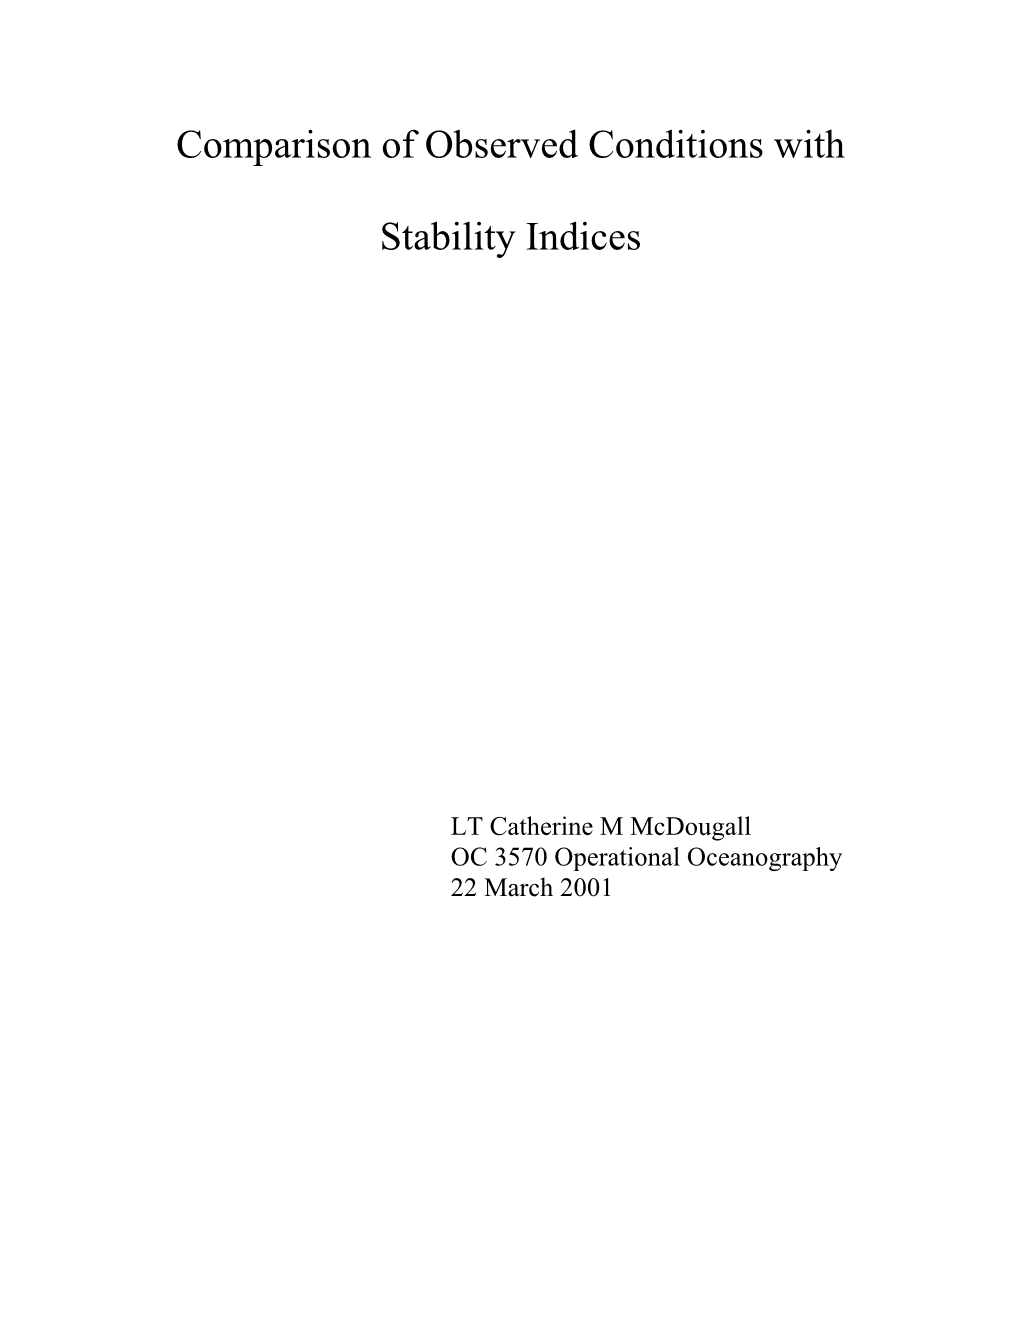 Comparison of Observed Conditions with Stability Indices